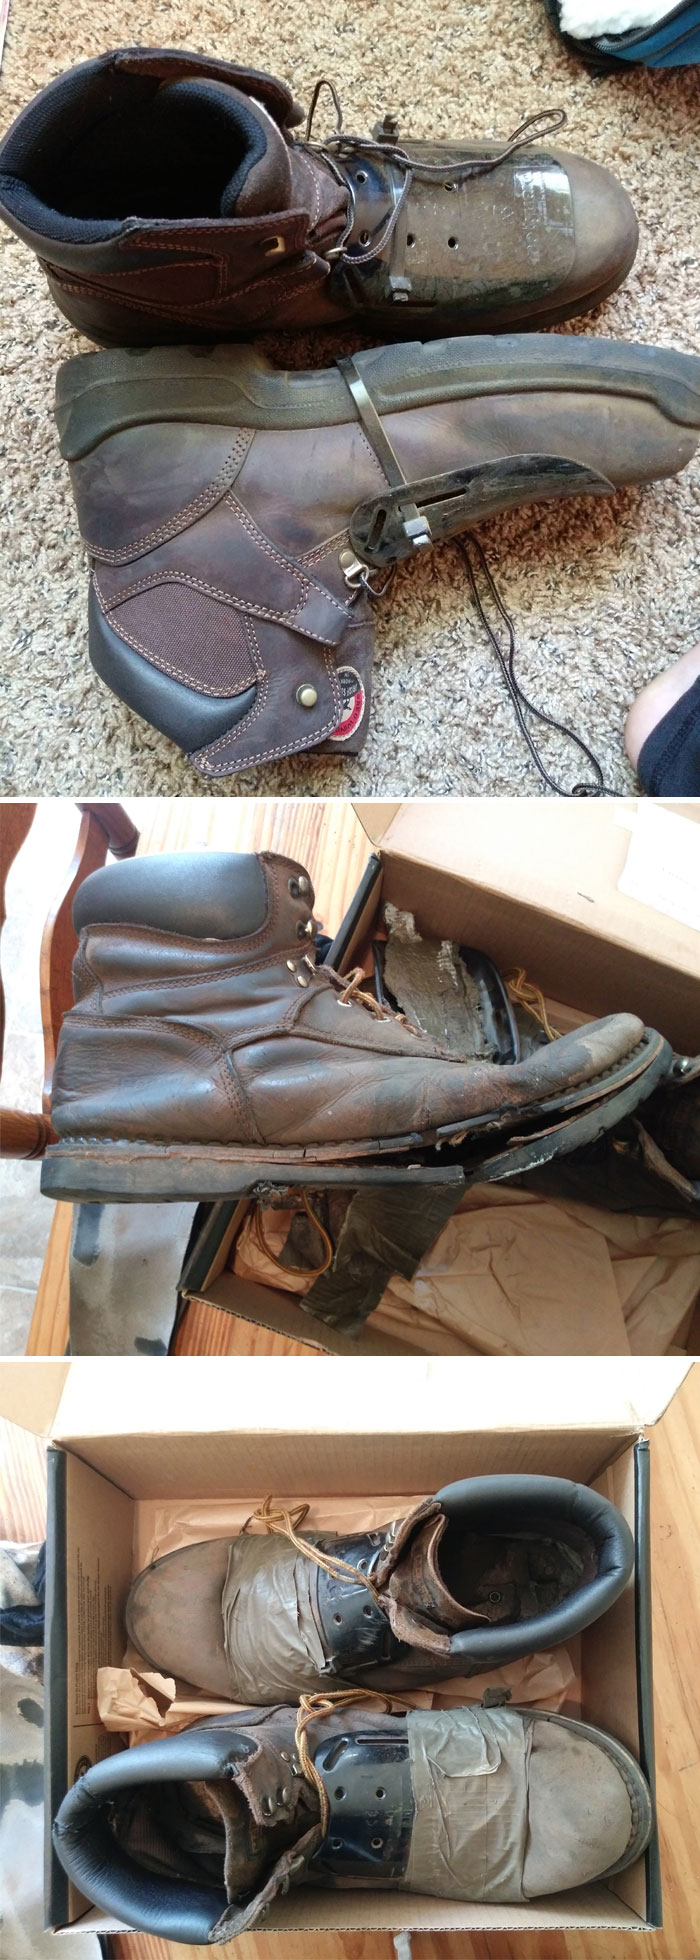 2 Guys From Work Got A New Pair Of Boots For Me